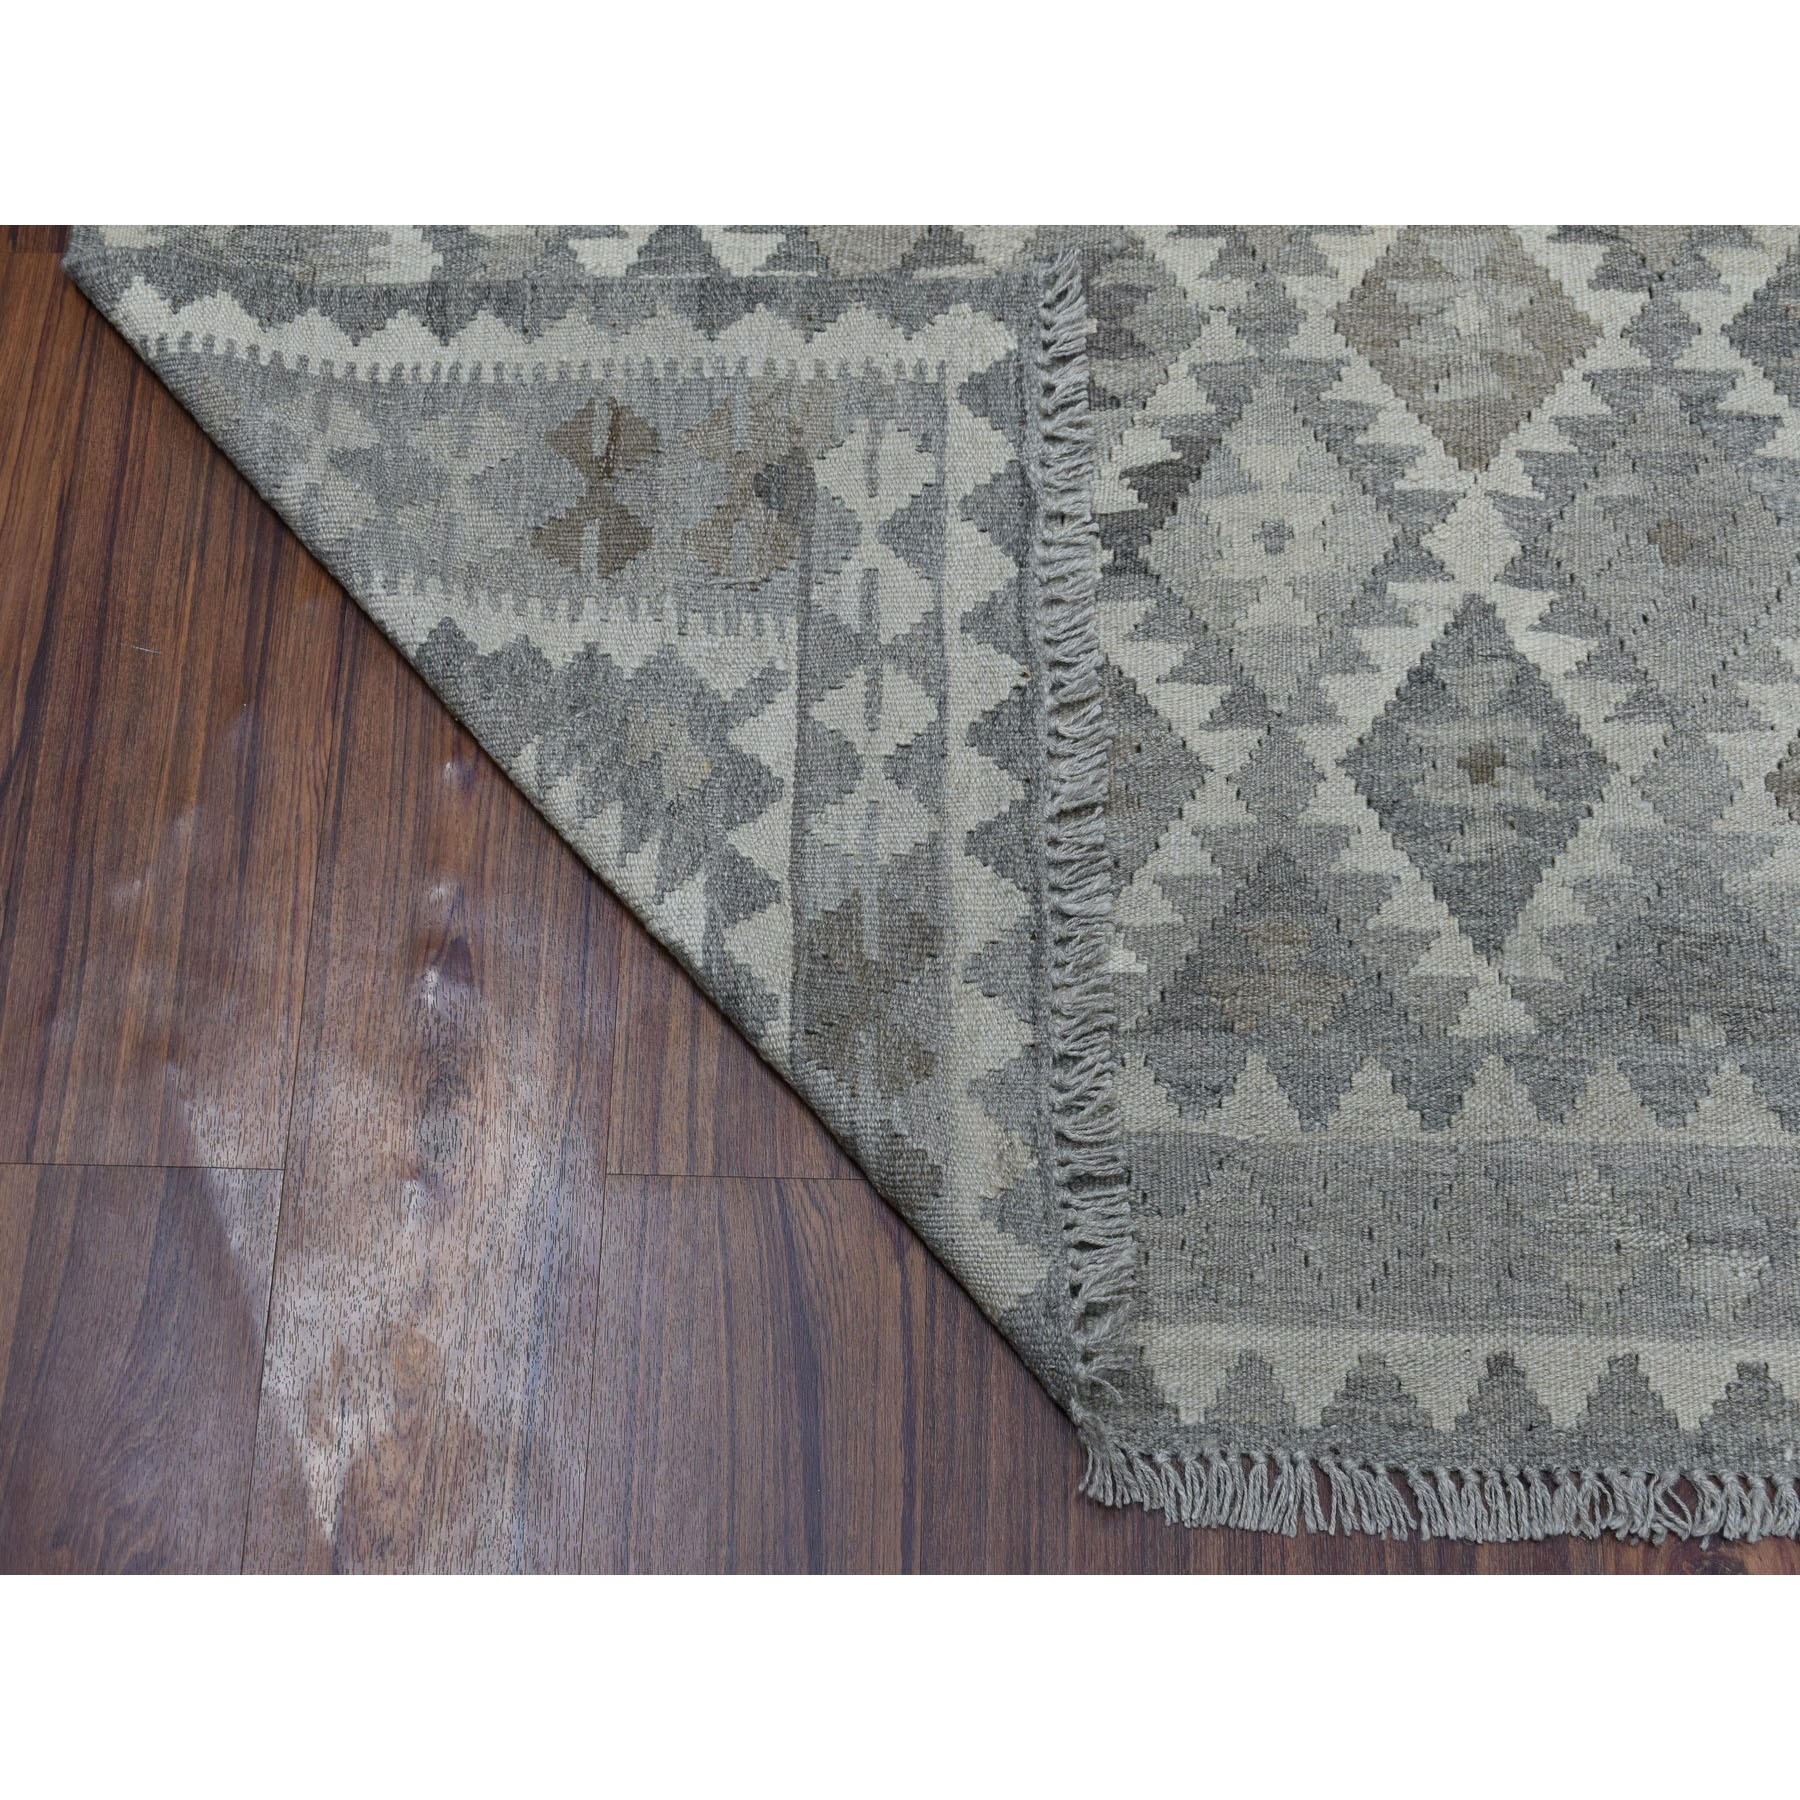 5-x6-6  Undyed Natural Wool Afghan Kilim Reversible Hand Woven Oriental Rug 